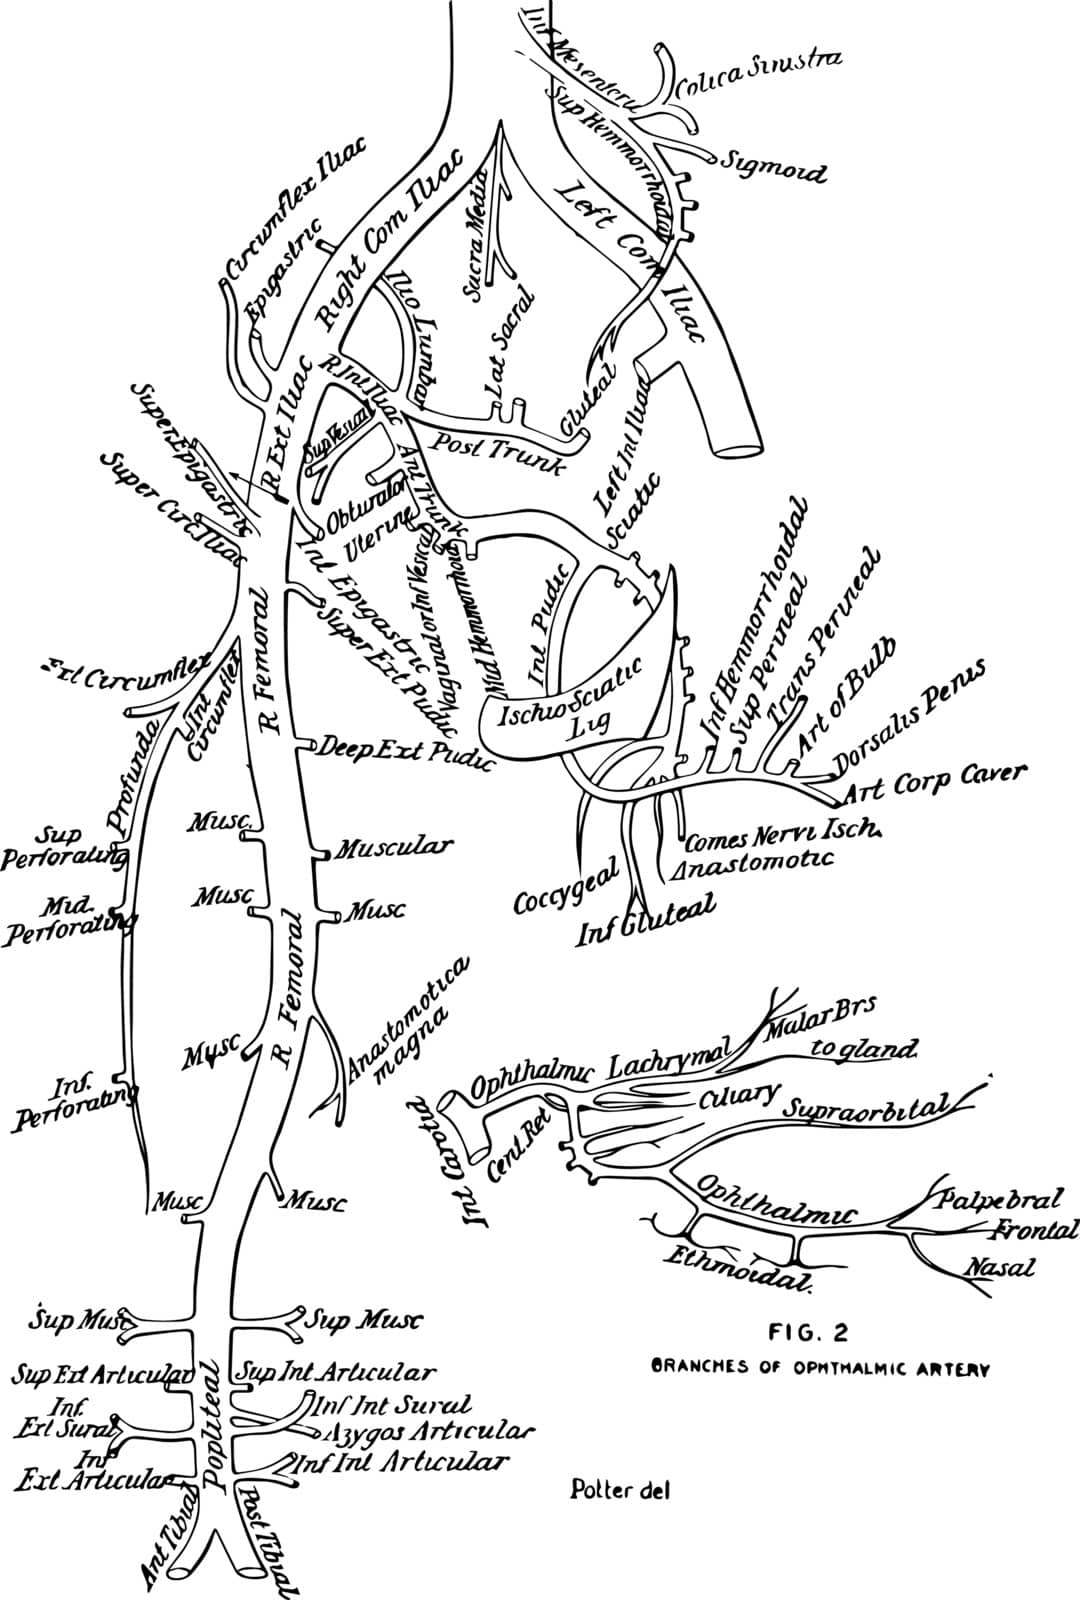 Branches of the Aorta vintage illustration. by Morphart